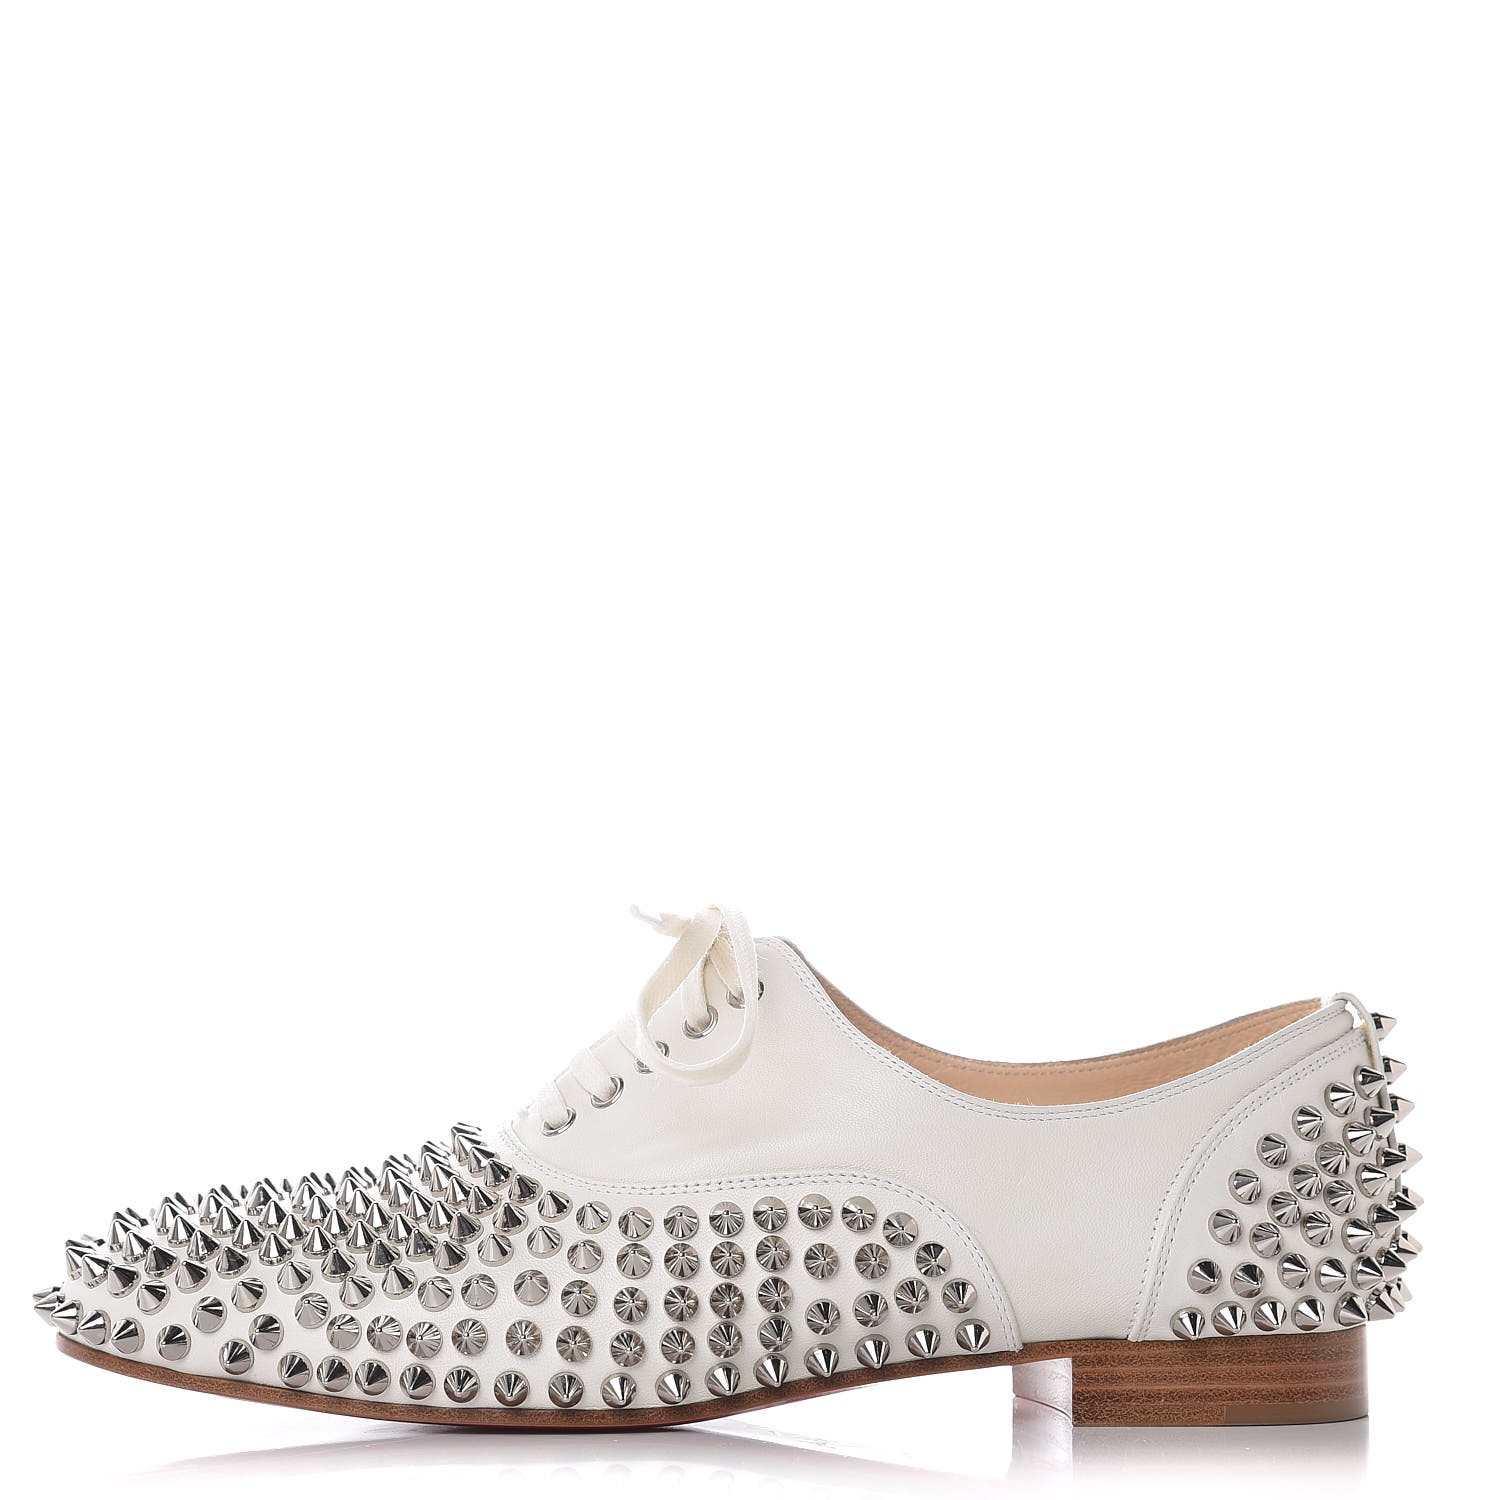 CHRISTIAN LOUBOUTIN Spikes Donna Flat Sneakers 38 Latte 348124 | FASHIONPHILE